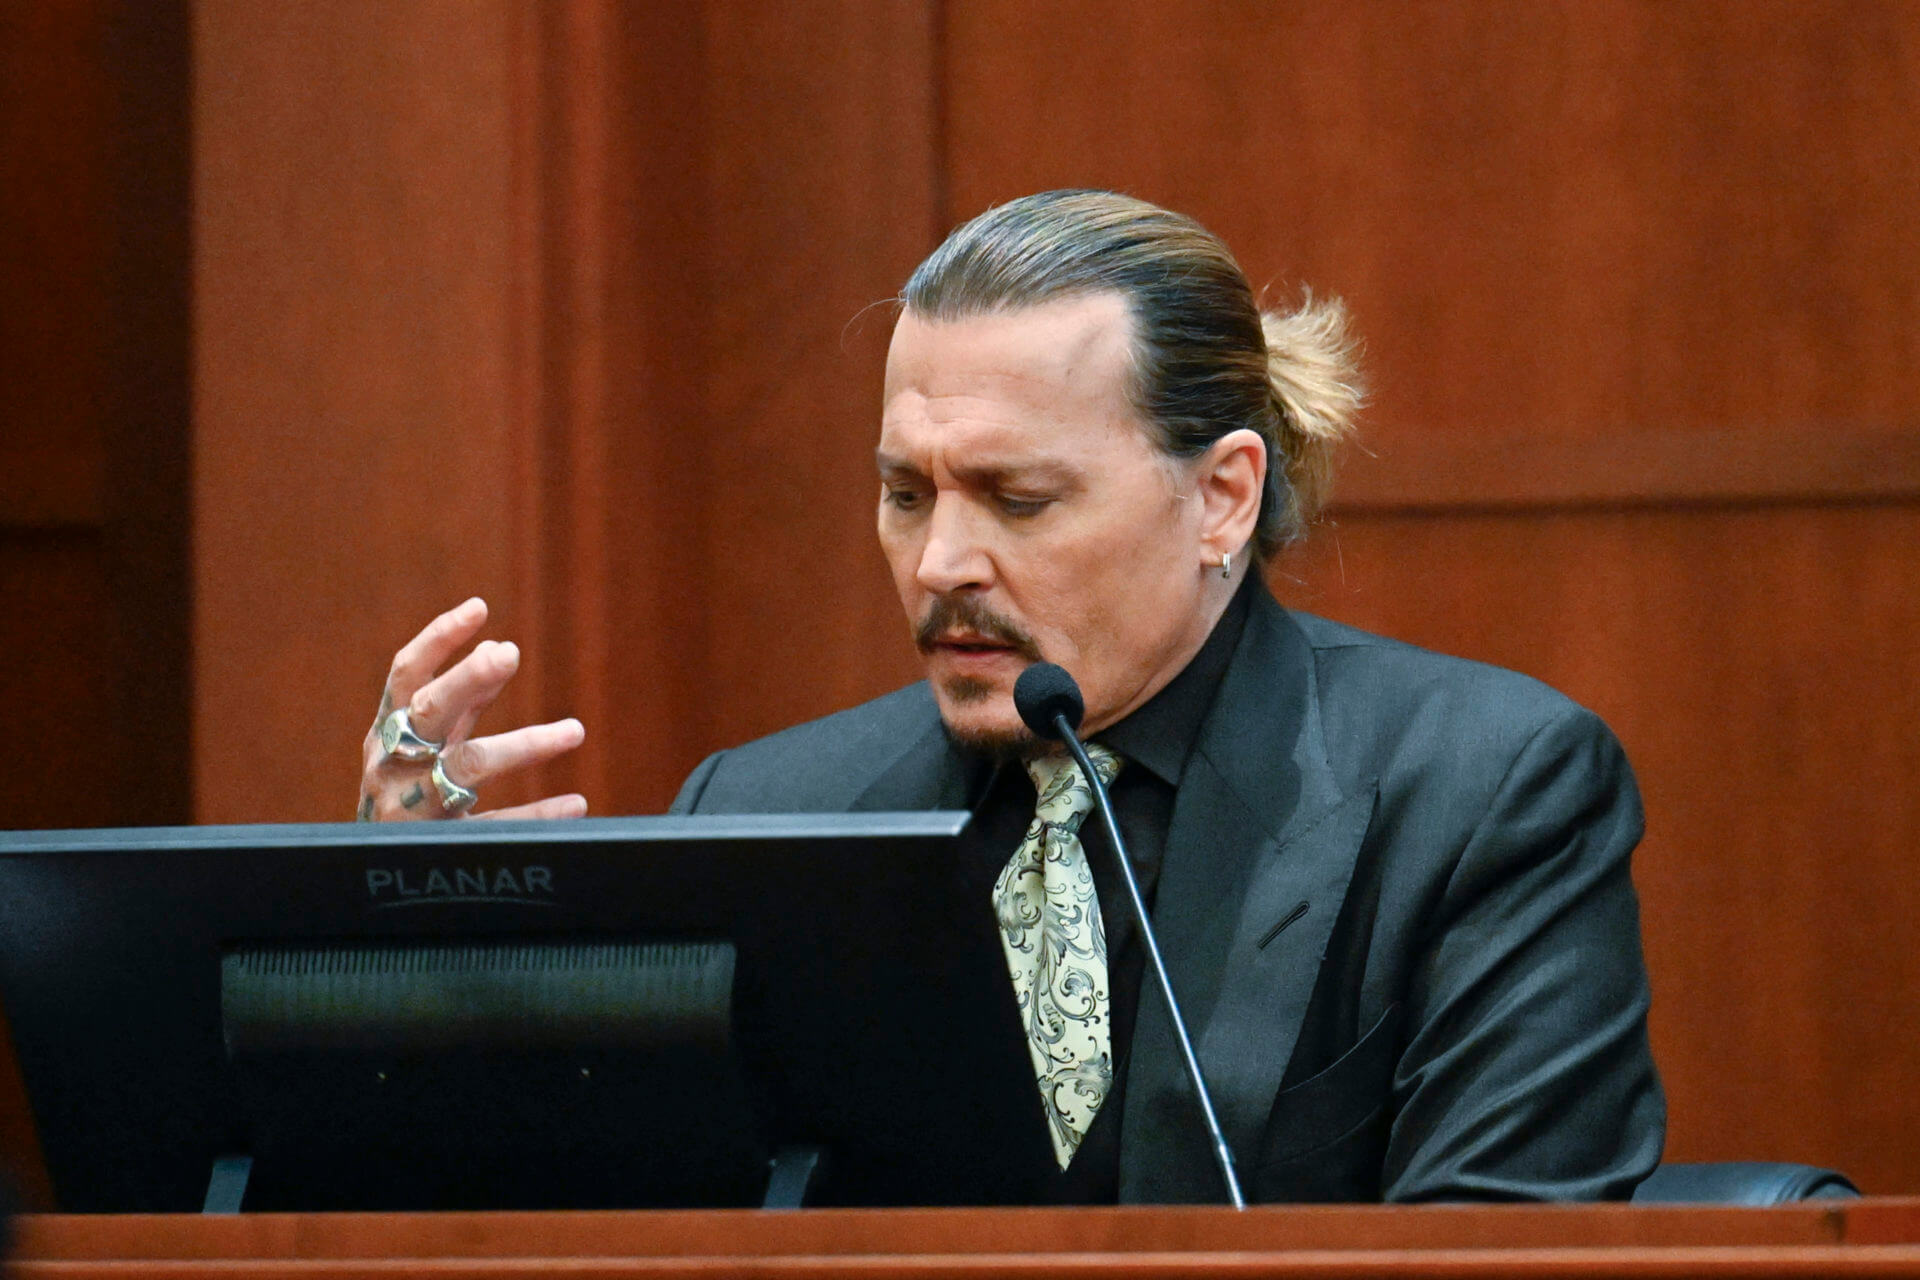 Johnny Depp Defamation Trial (Part 1), Depp Takes the Stand – Court TV Podcast